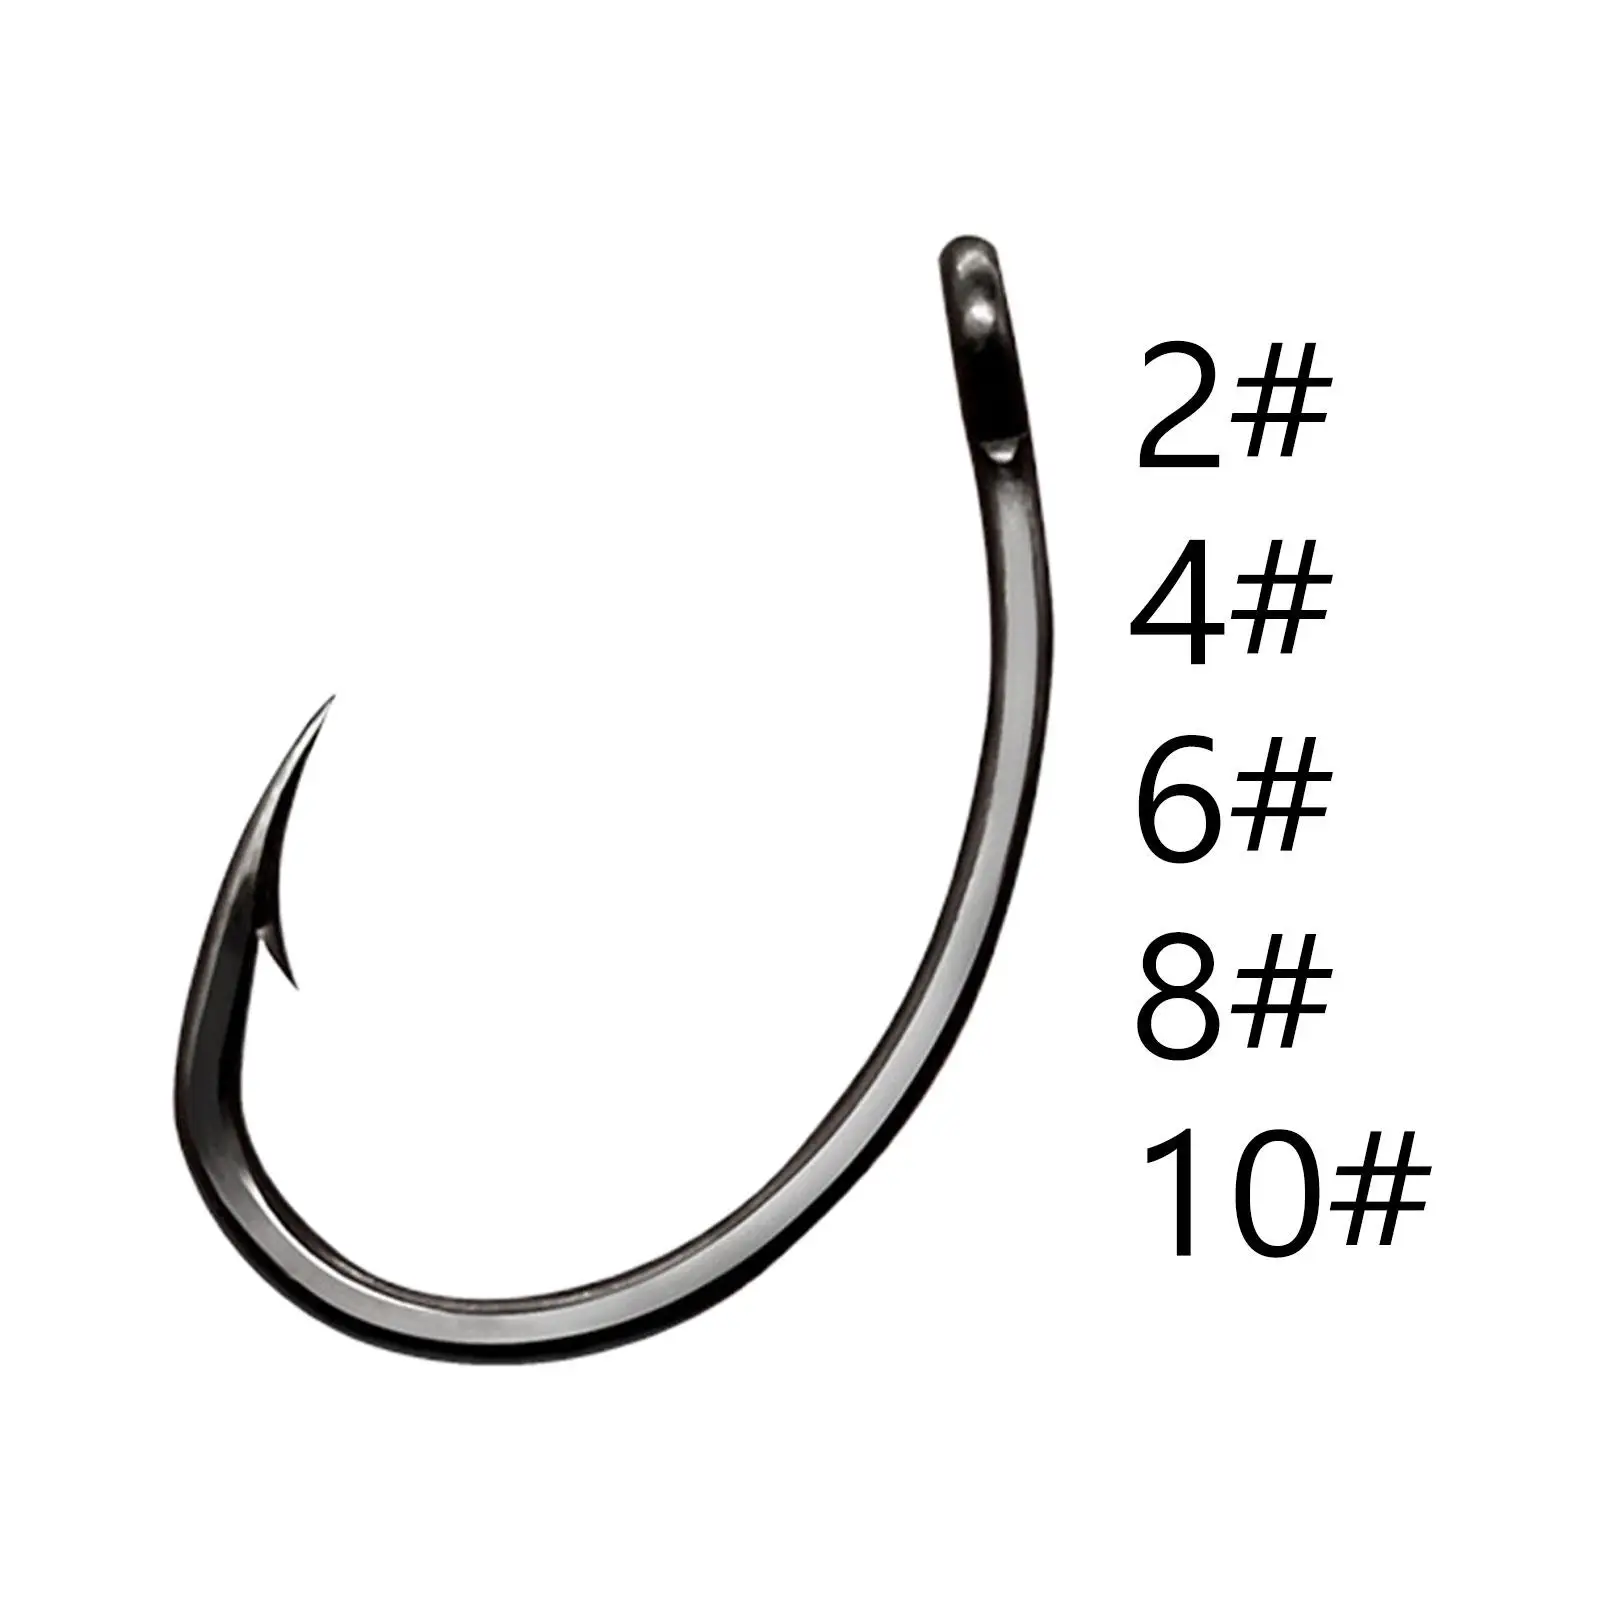 50x Fly Fishing Hooks for Fishing Lures Saltwater Heavy Duty Versatile Freshwater for Dry Flies Fly Hooks for Bass Catfish Trout